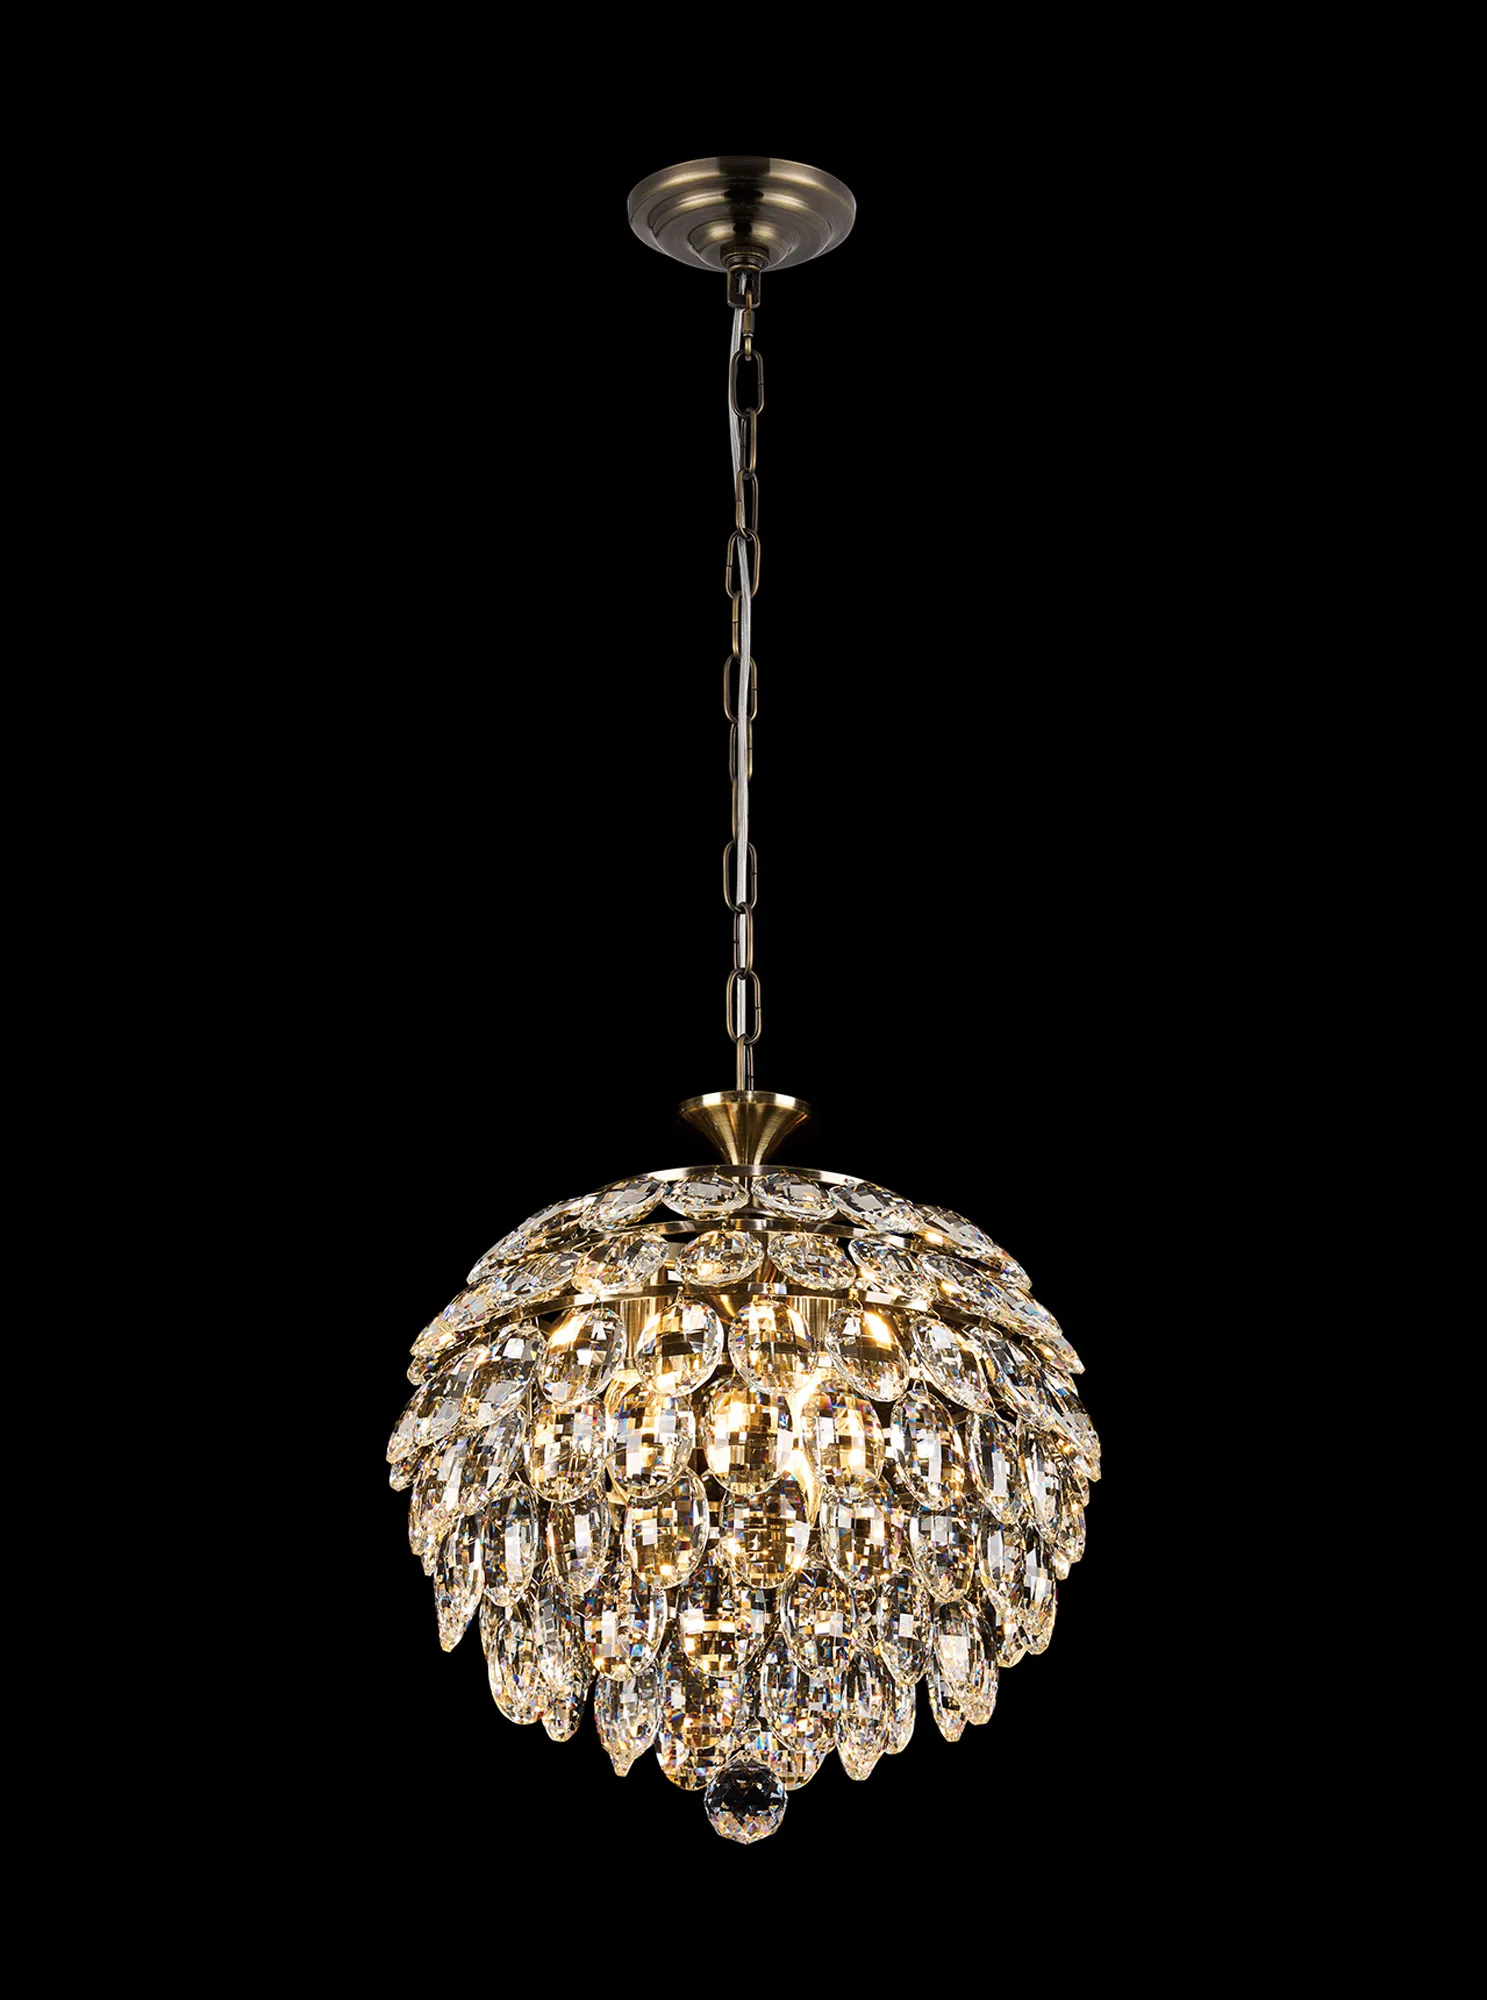 Coniston Antique Brass Crystal Ceiling Lights Diyas Spherical Crystal Fittings